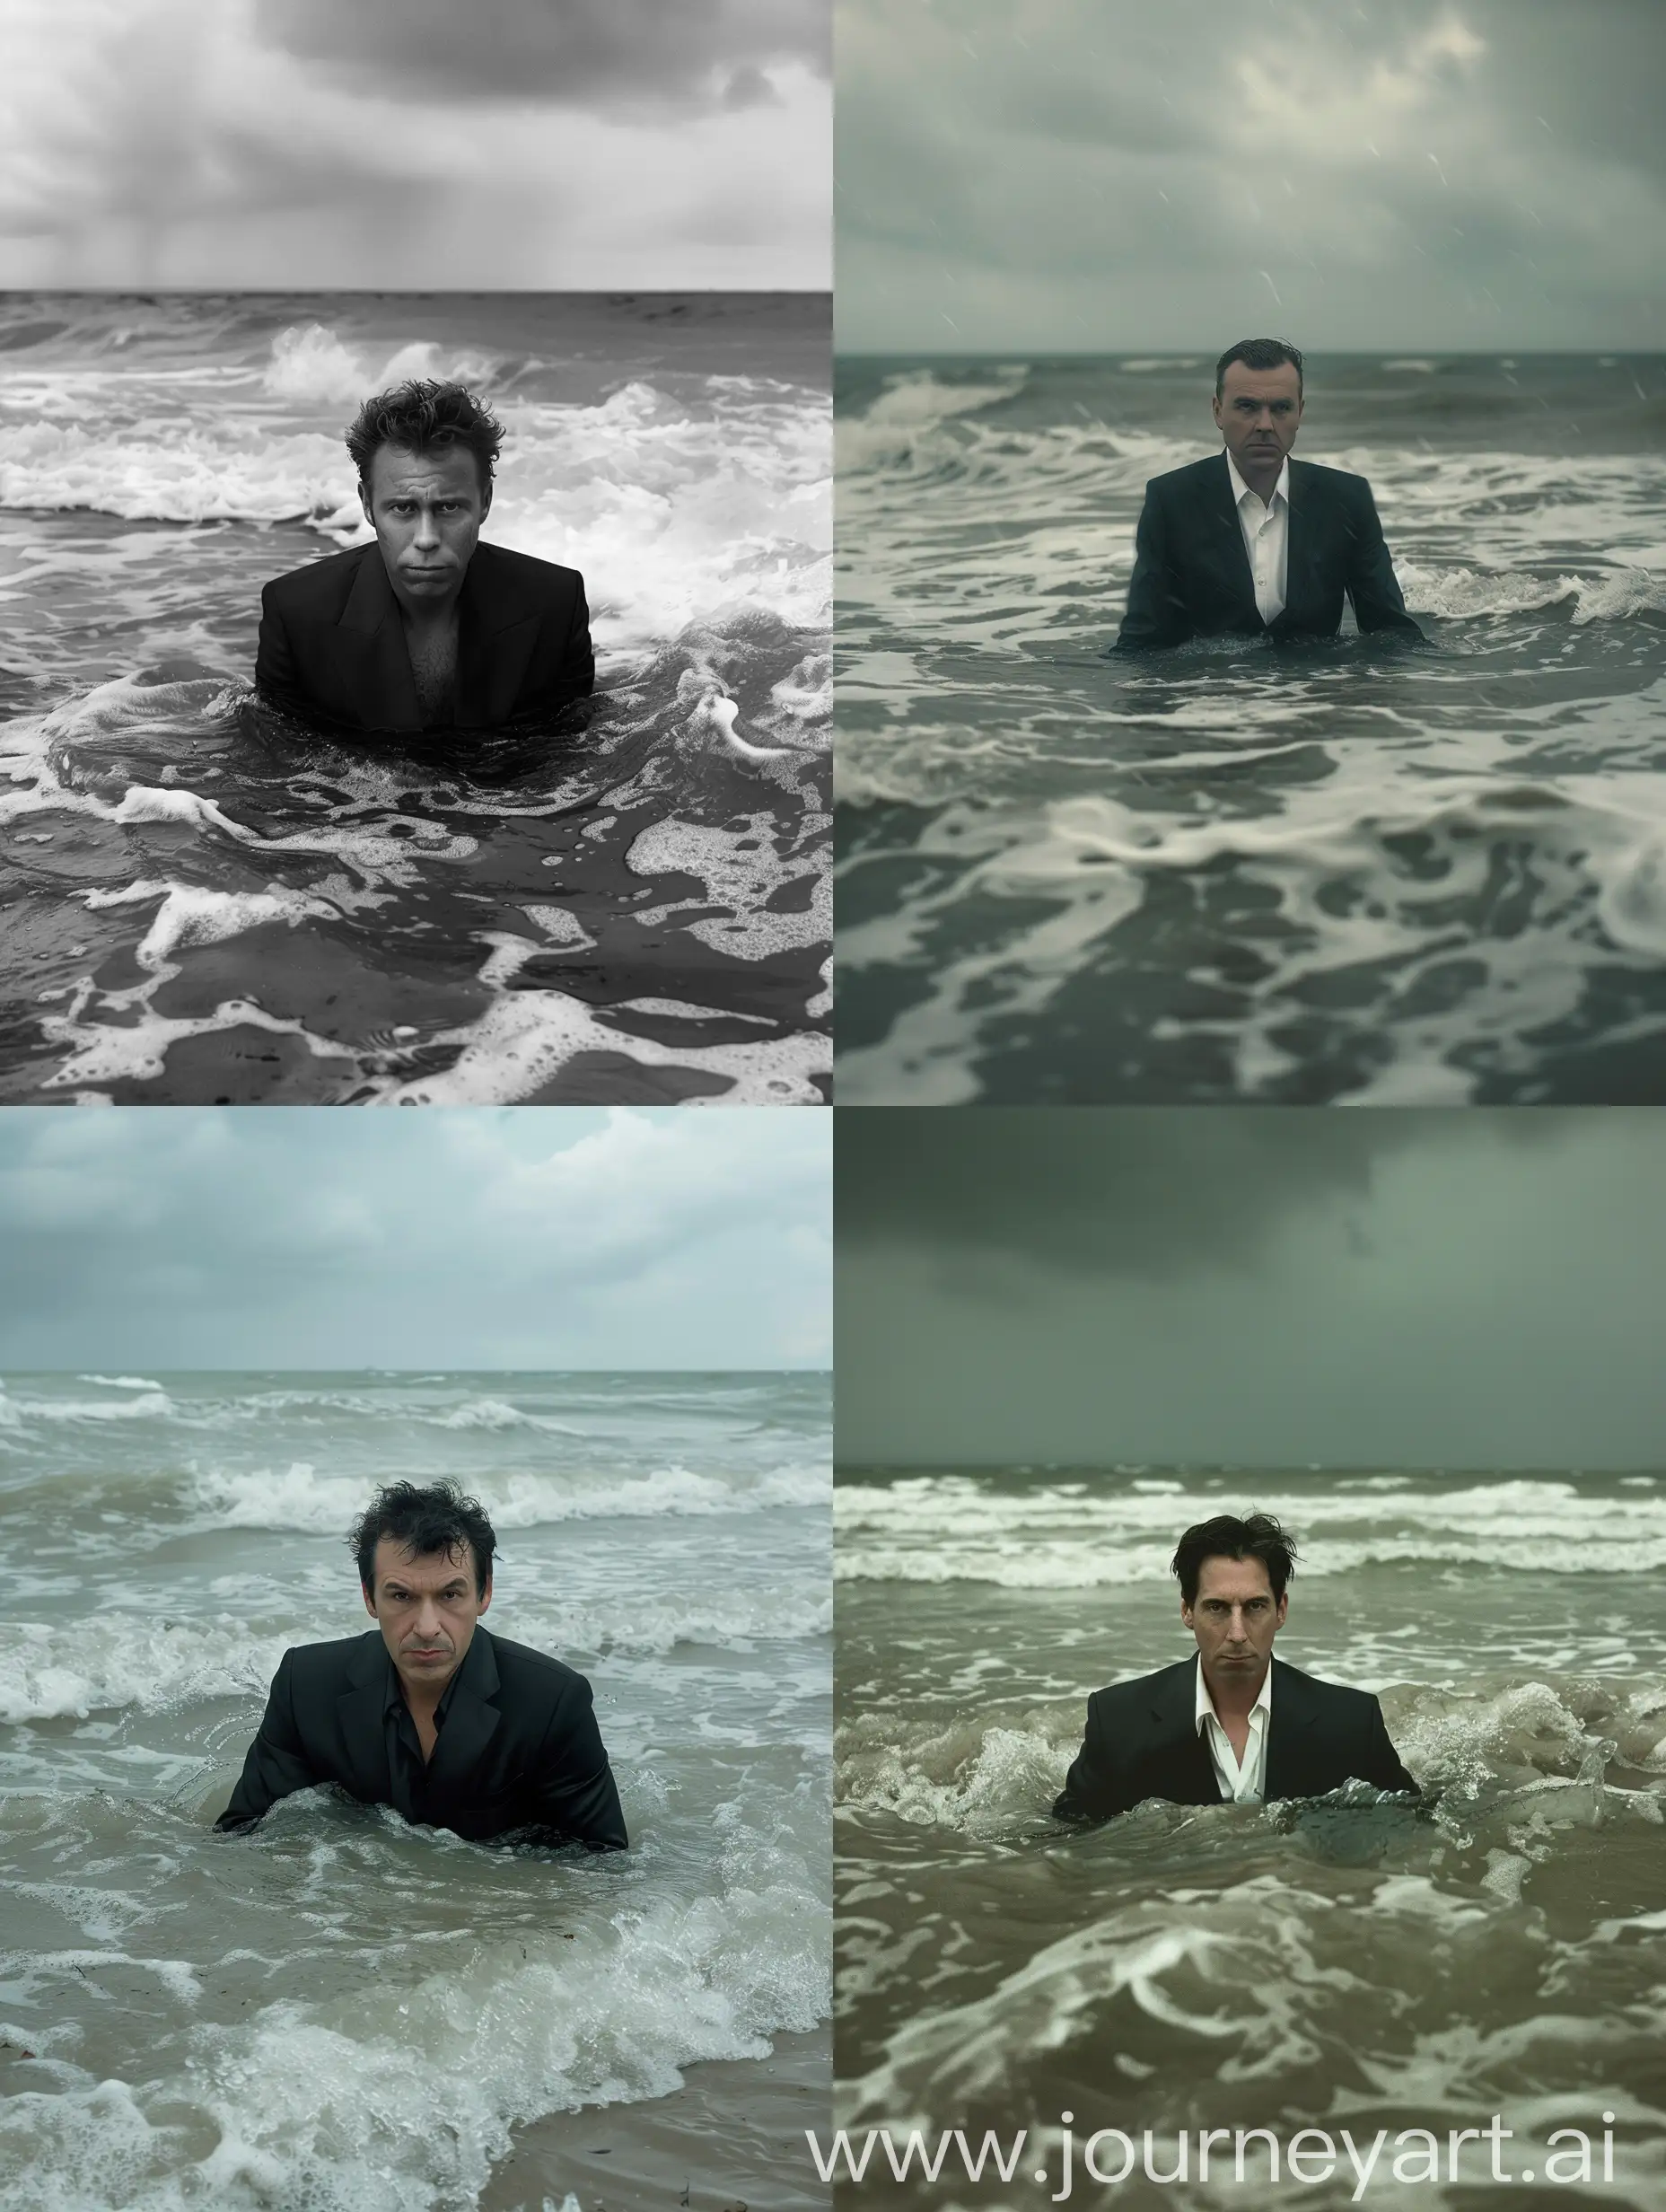  On the beach, in a long shot, we see a man wearing a black suit waist-deep in stormy sea water. The poker-faced man stares into the lens.